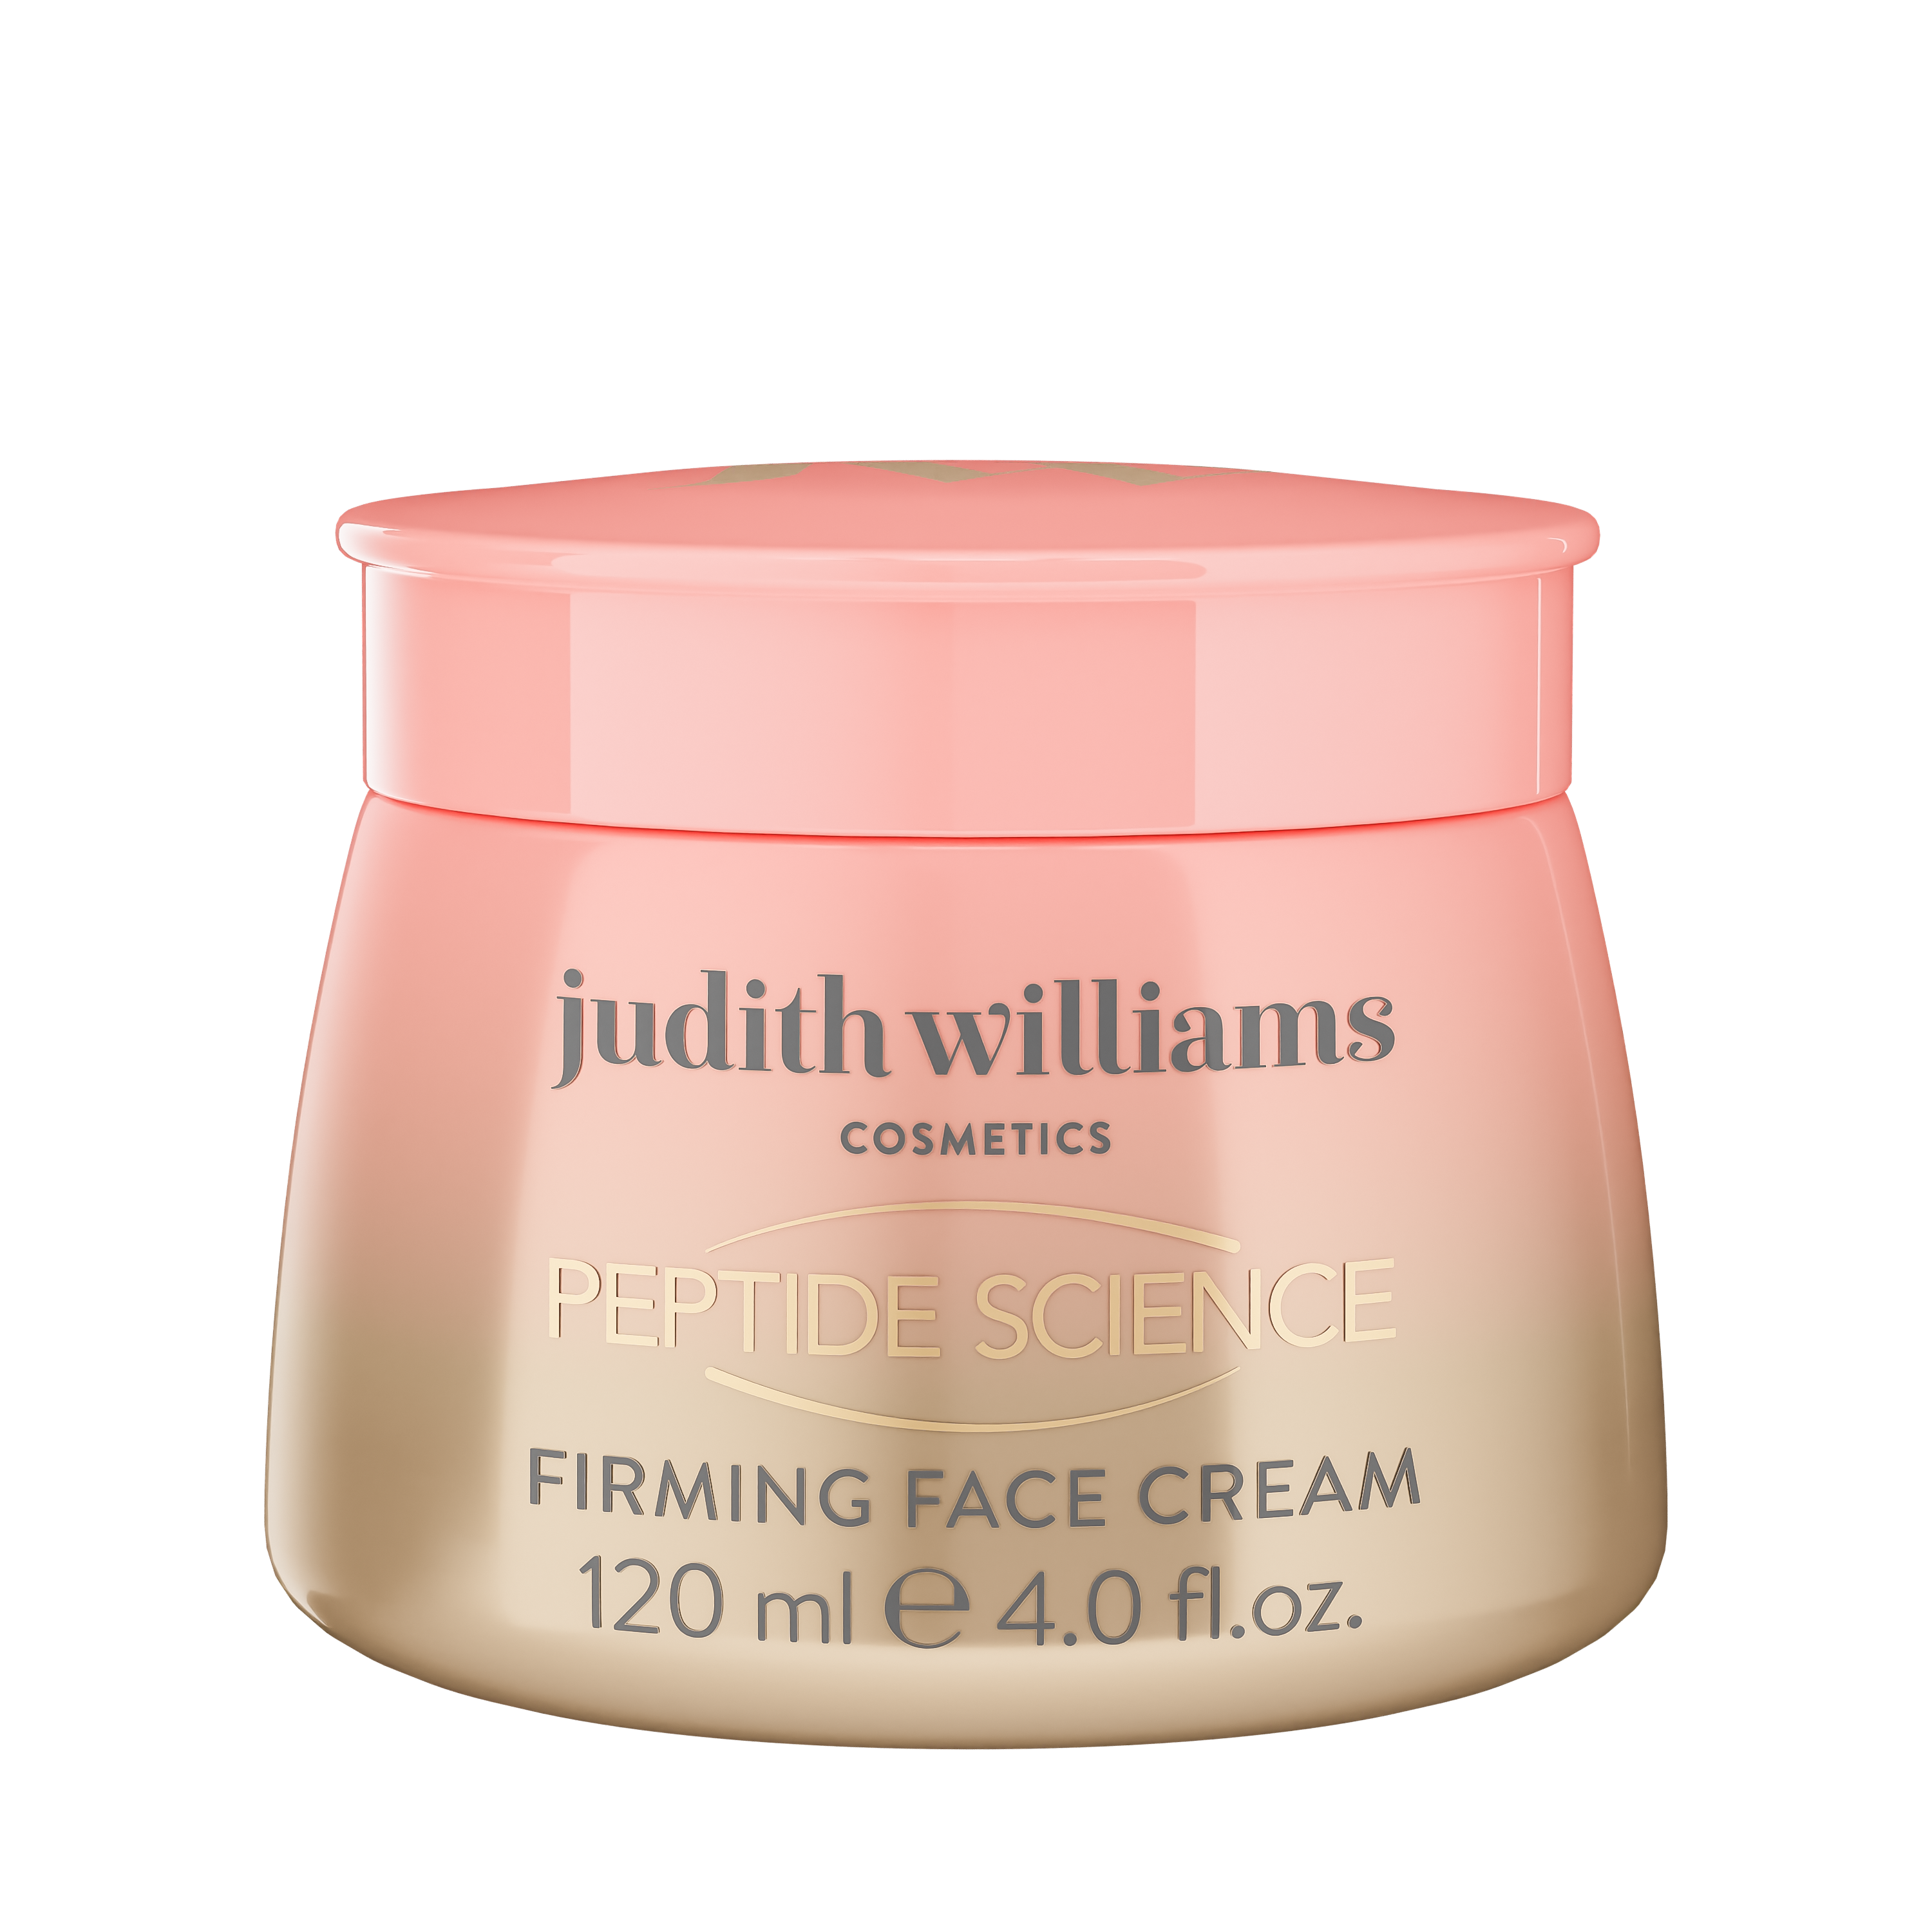 Peptide Science Firming Face Cream